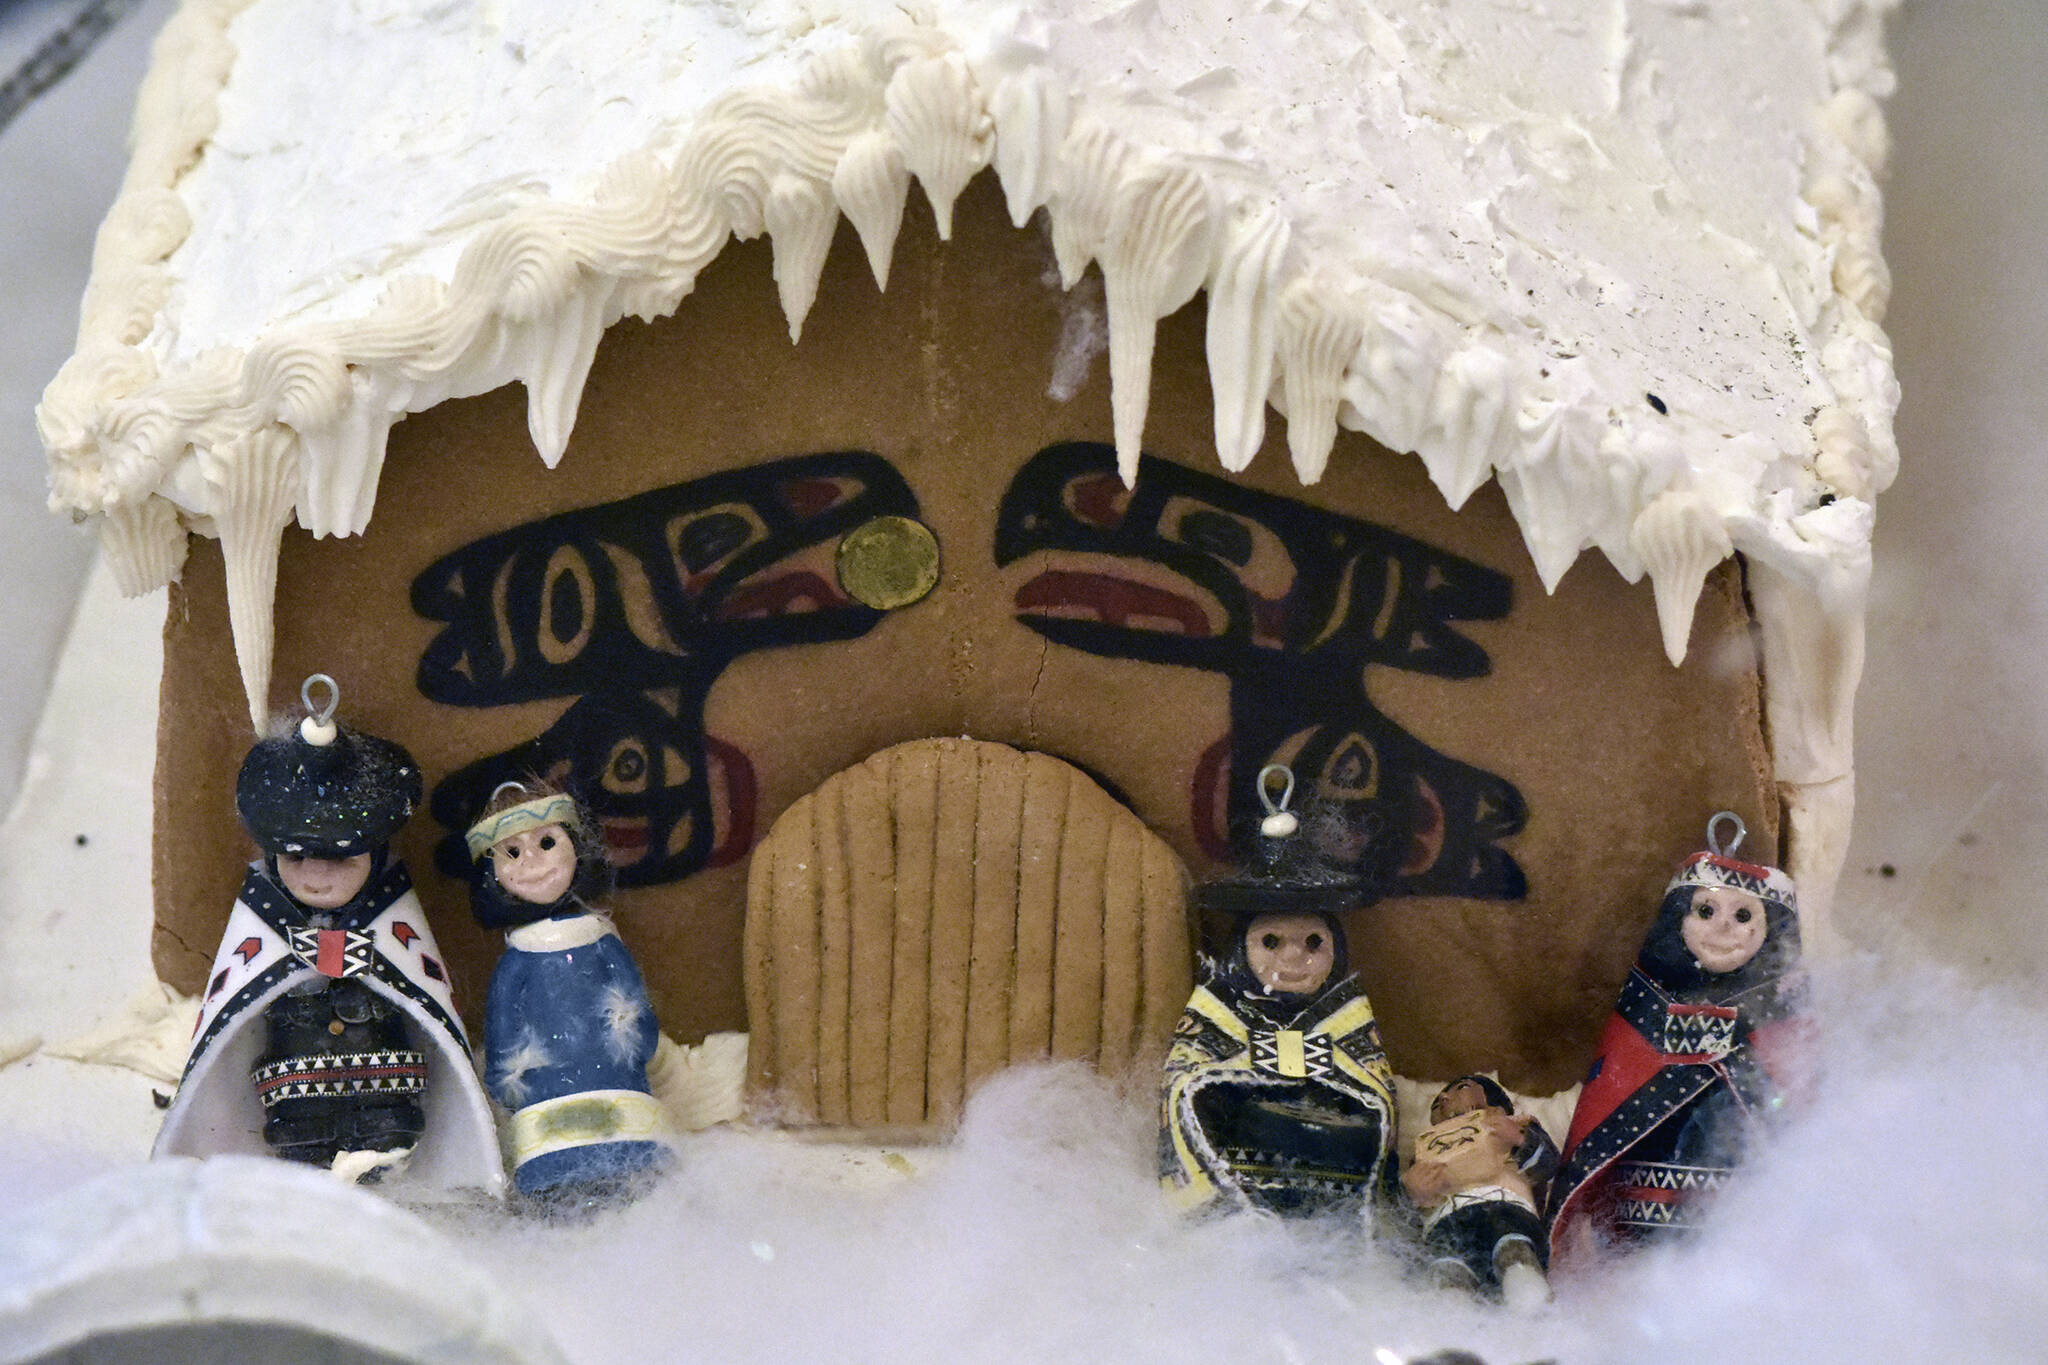 A Southeast Alaska Native gingerbread house was among the Christmas decorations on display at the Alaska Governor’s Mansion on Tuesday, Dec. 7, 2021, during a Christmas open house event. (Peter Segall / Juneau Empire)